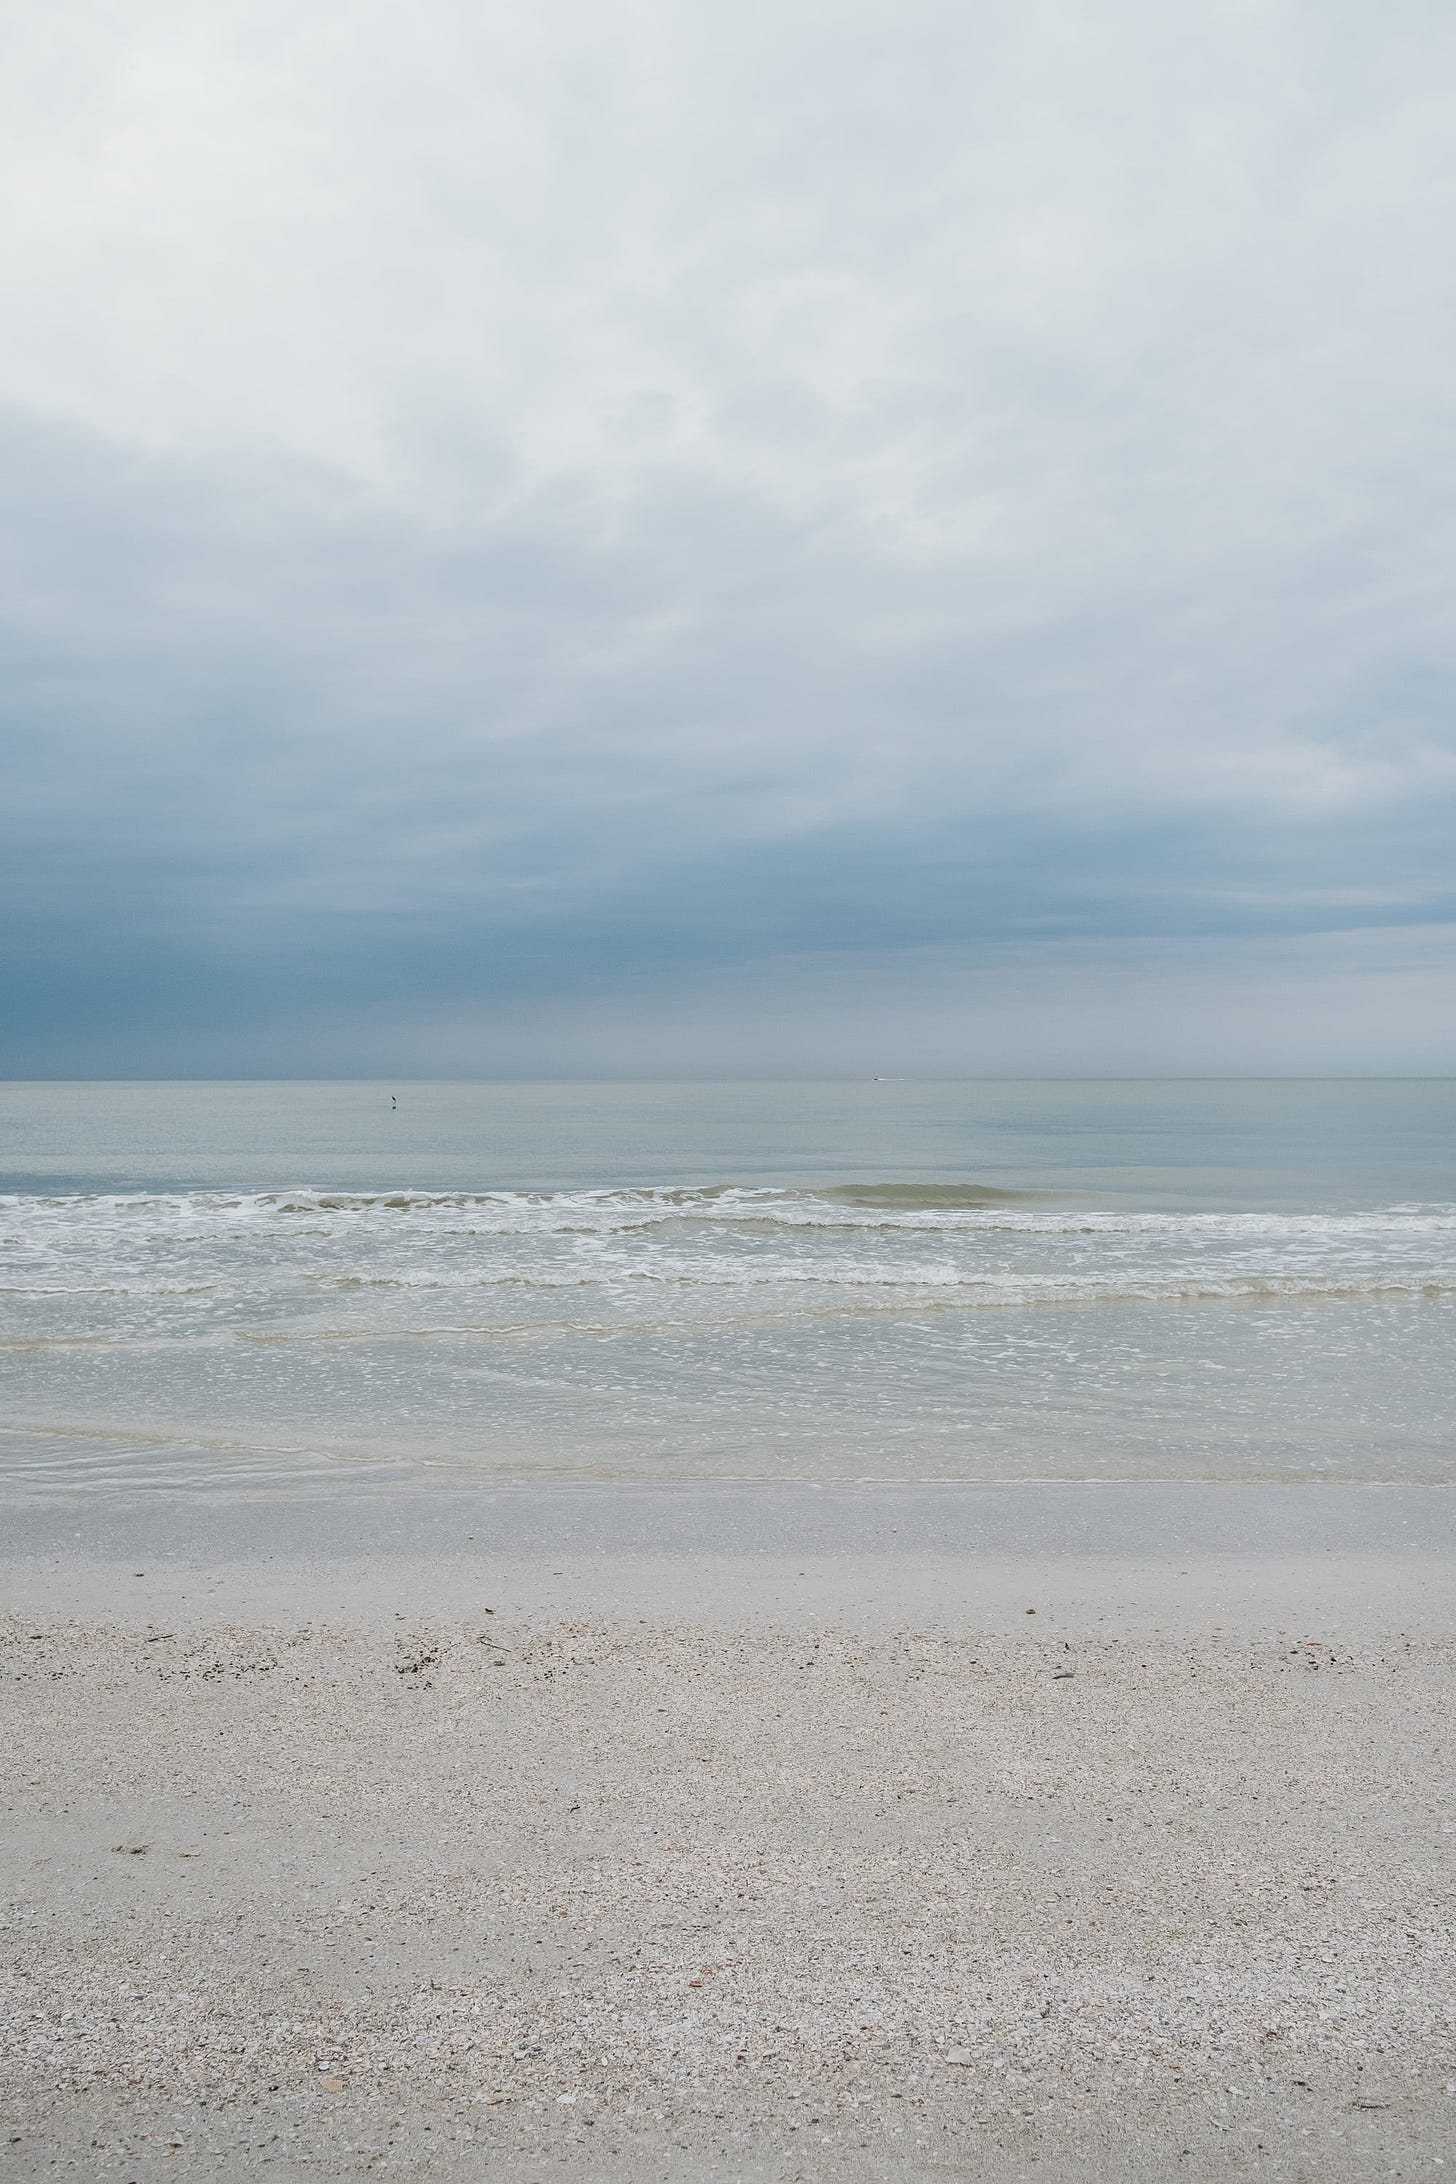 A view out to sea on a moody cloudy day. Gentle waves breaking on beach in foreground.